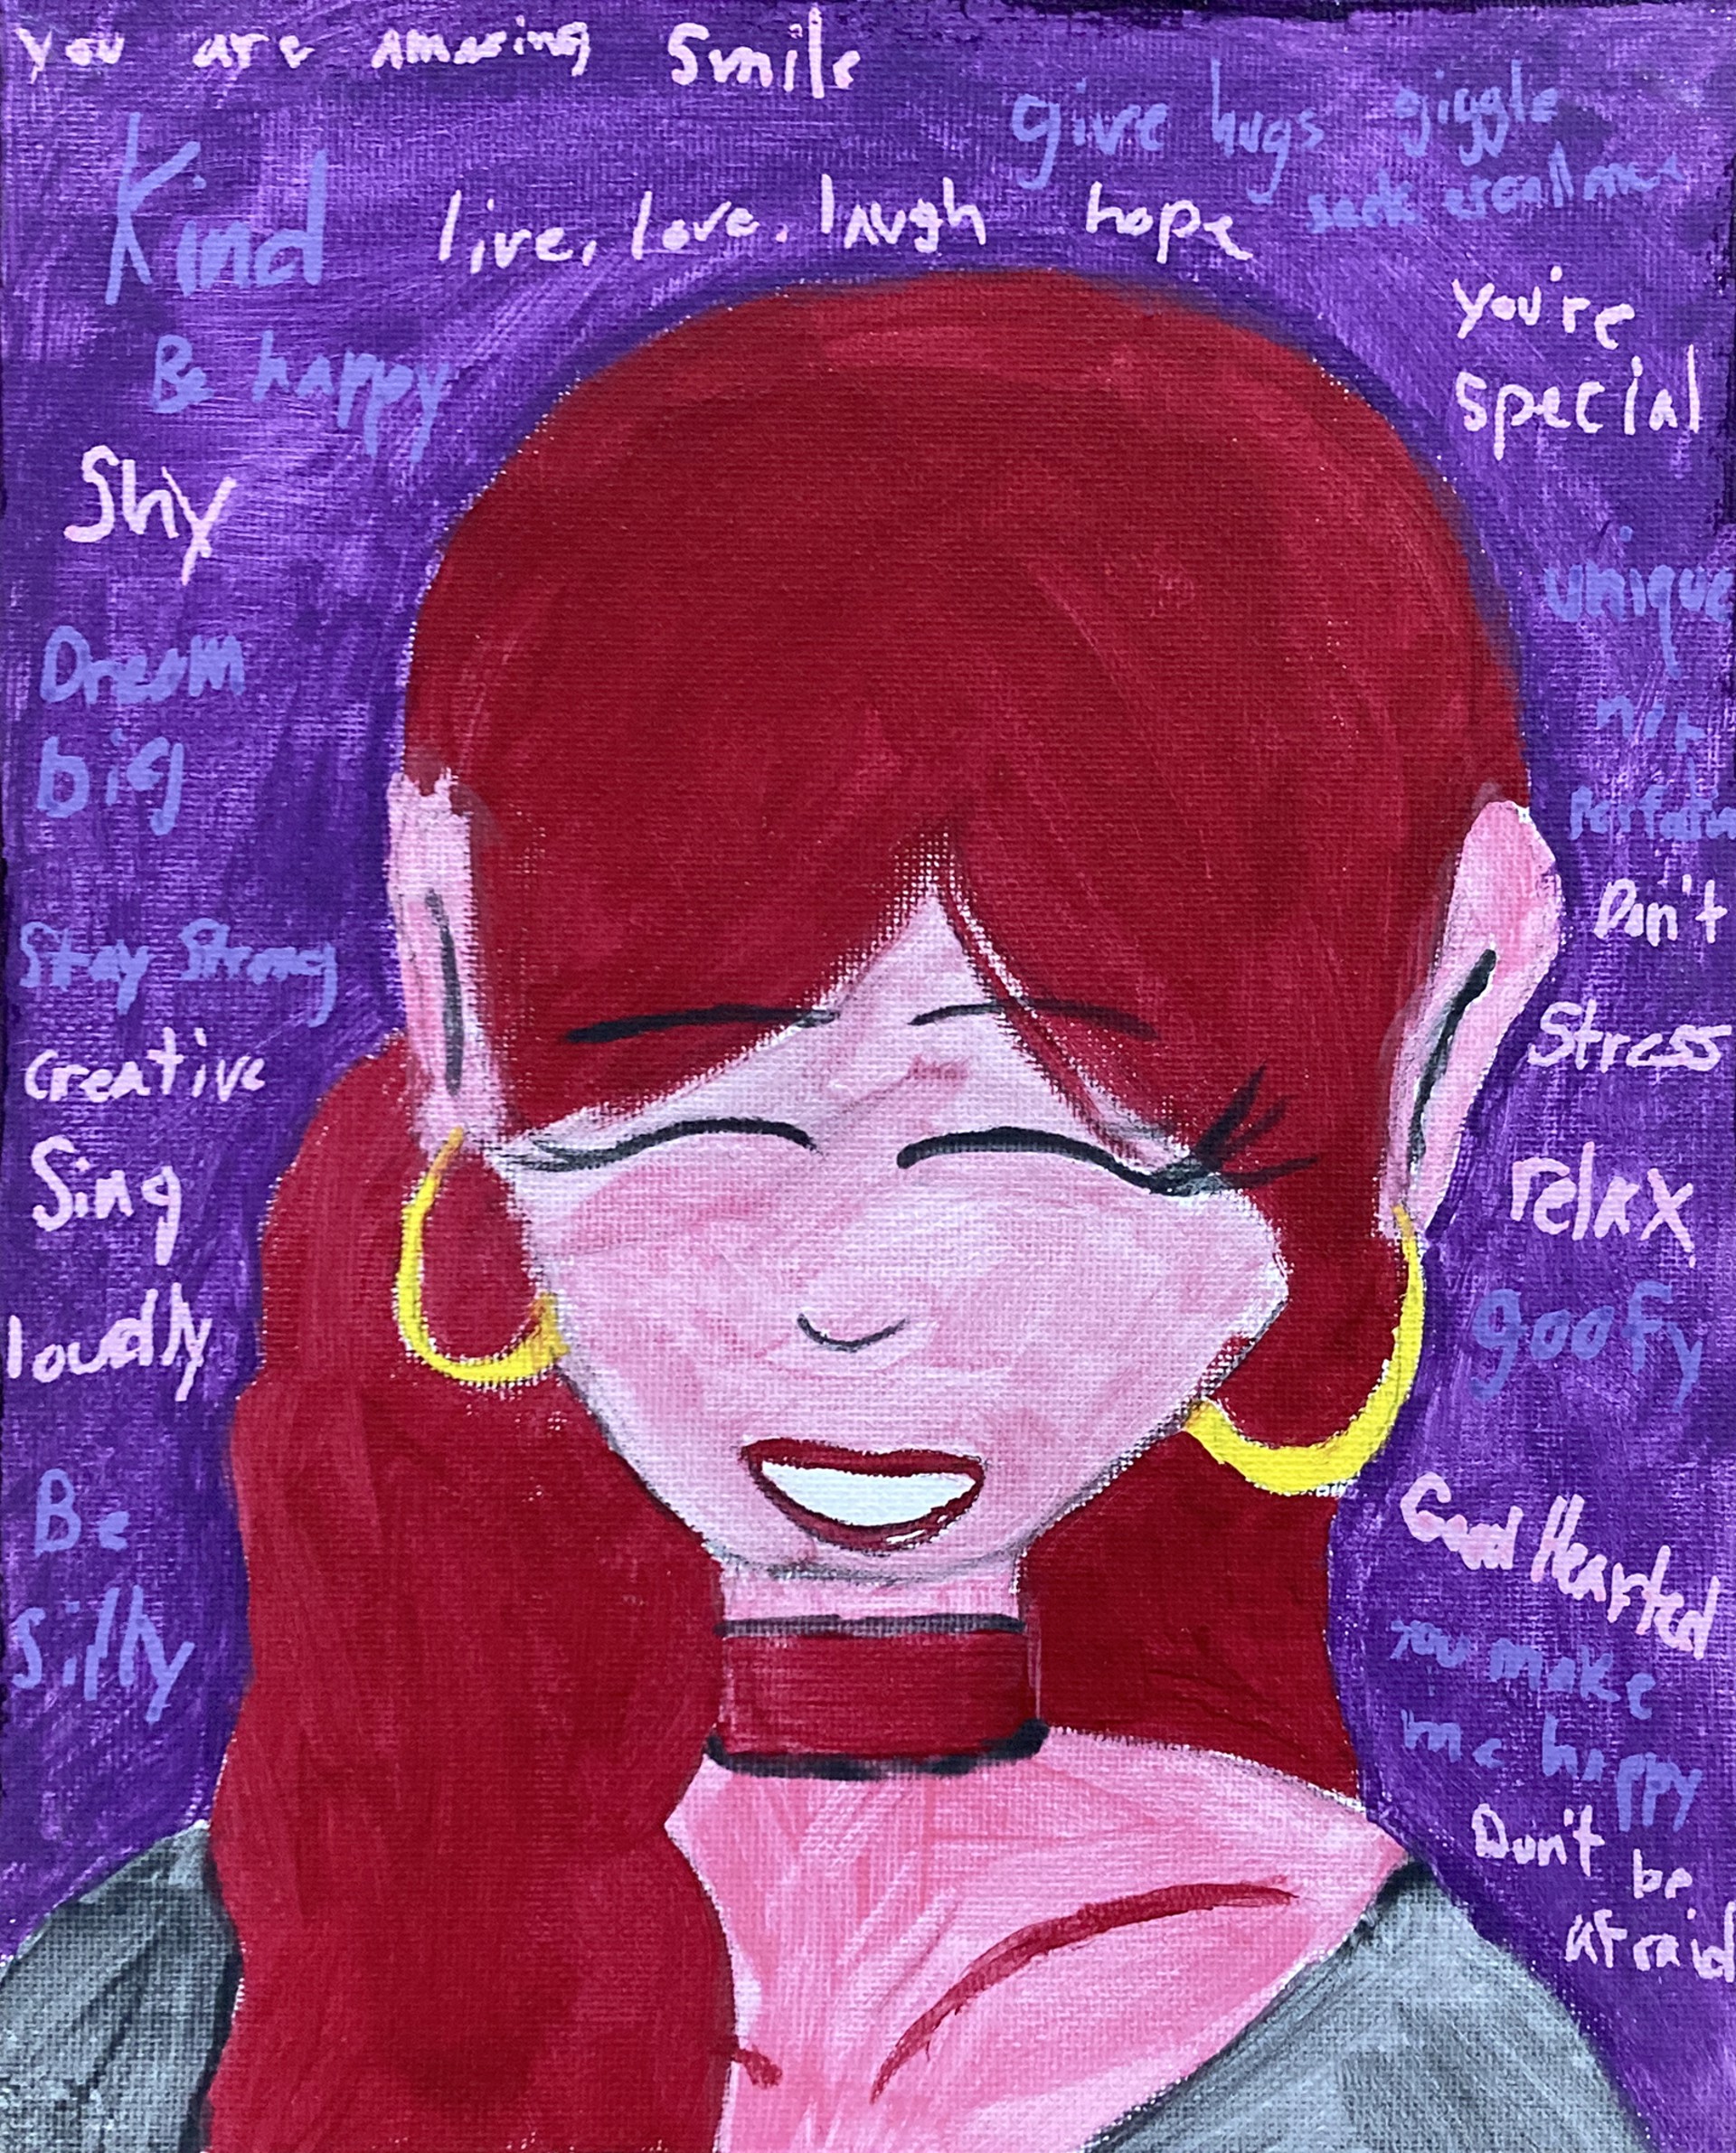 "Smile" by Artist Unknown by Autism Academy